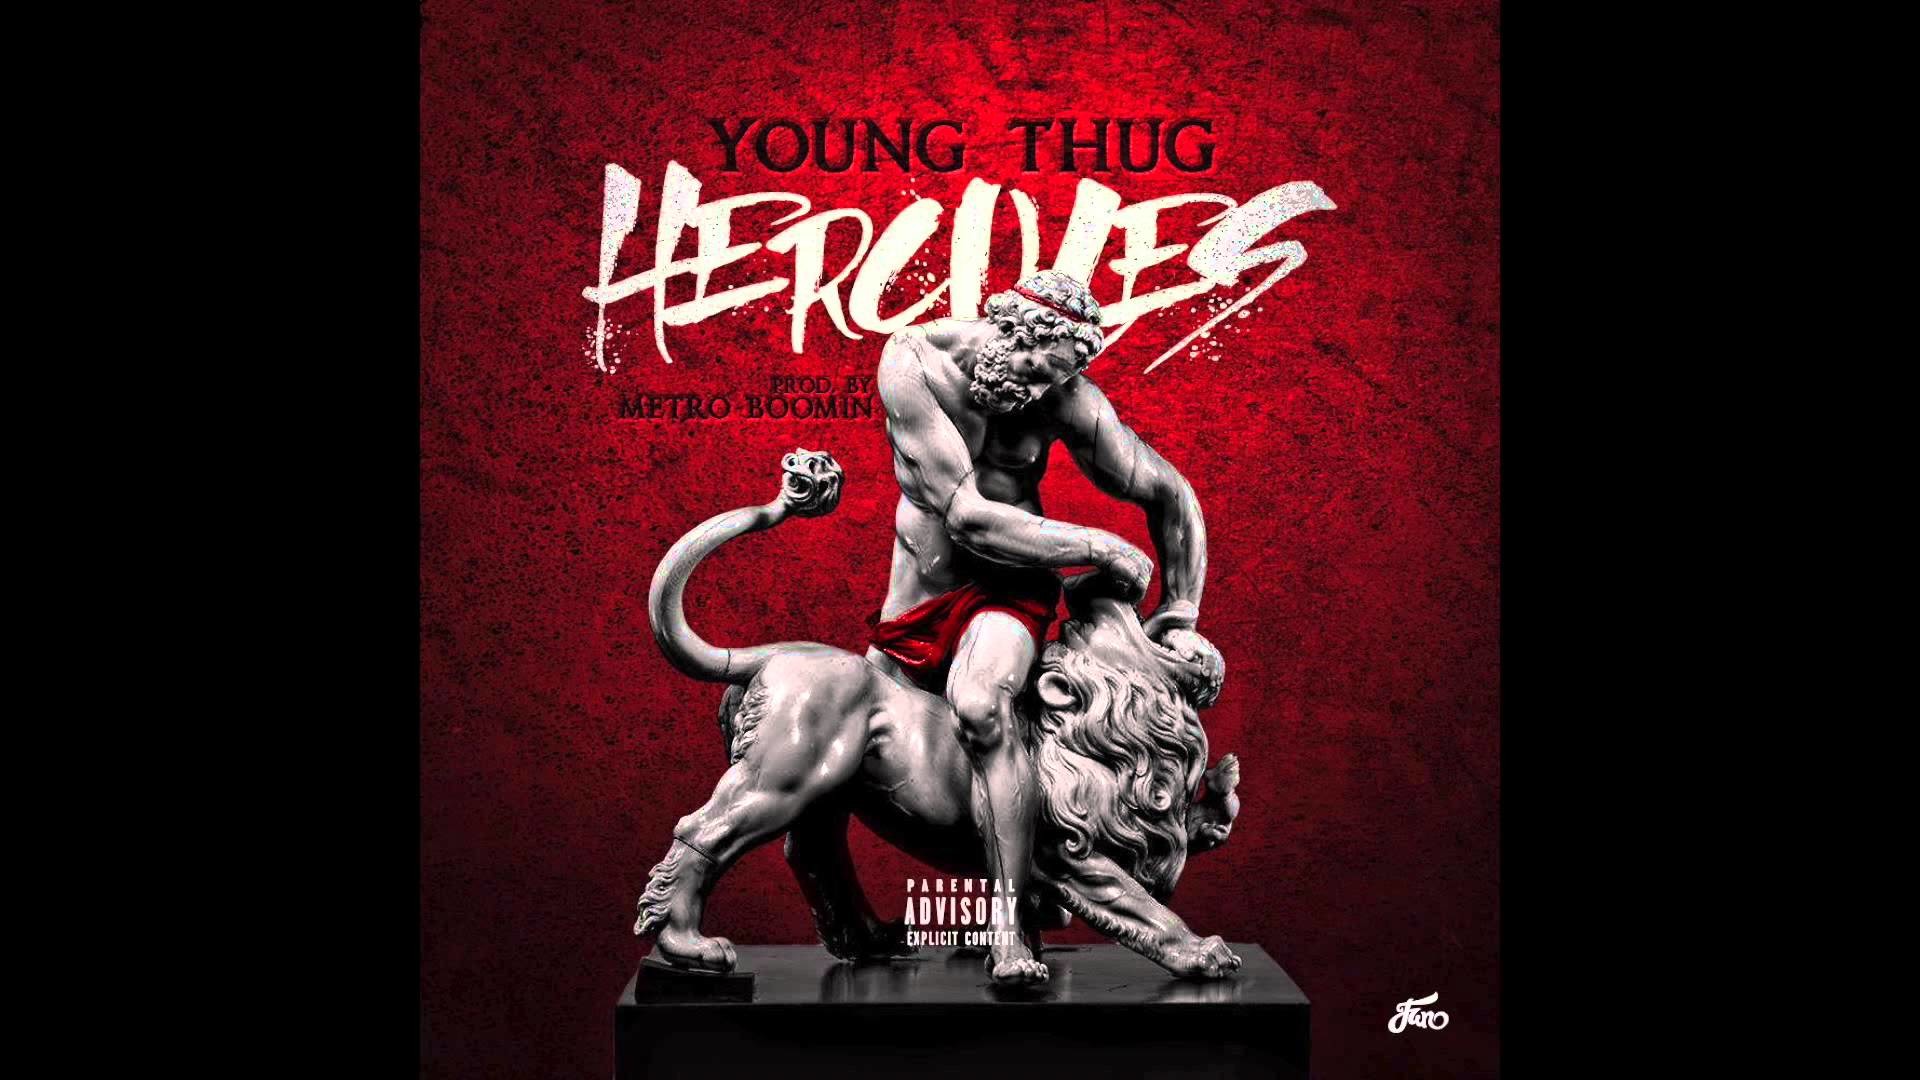 1920x1080 Young Thug "Hercules" Produced by Metro Boomin (WSHH Exclusive - Official  Audio) — HipHopNews24.com